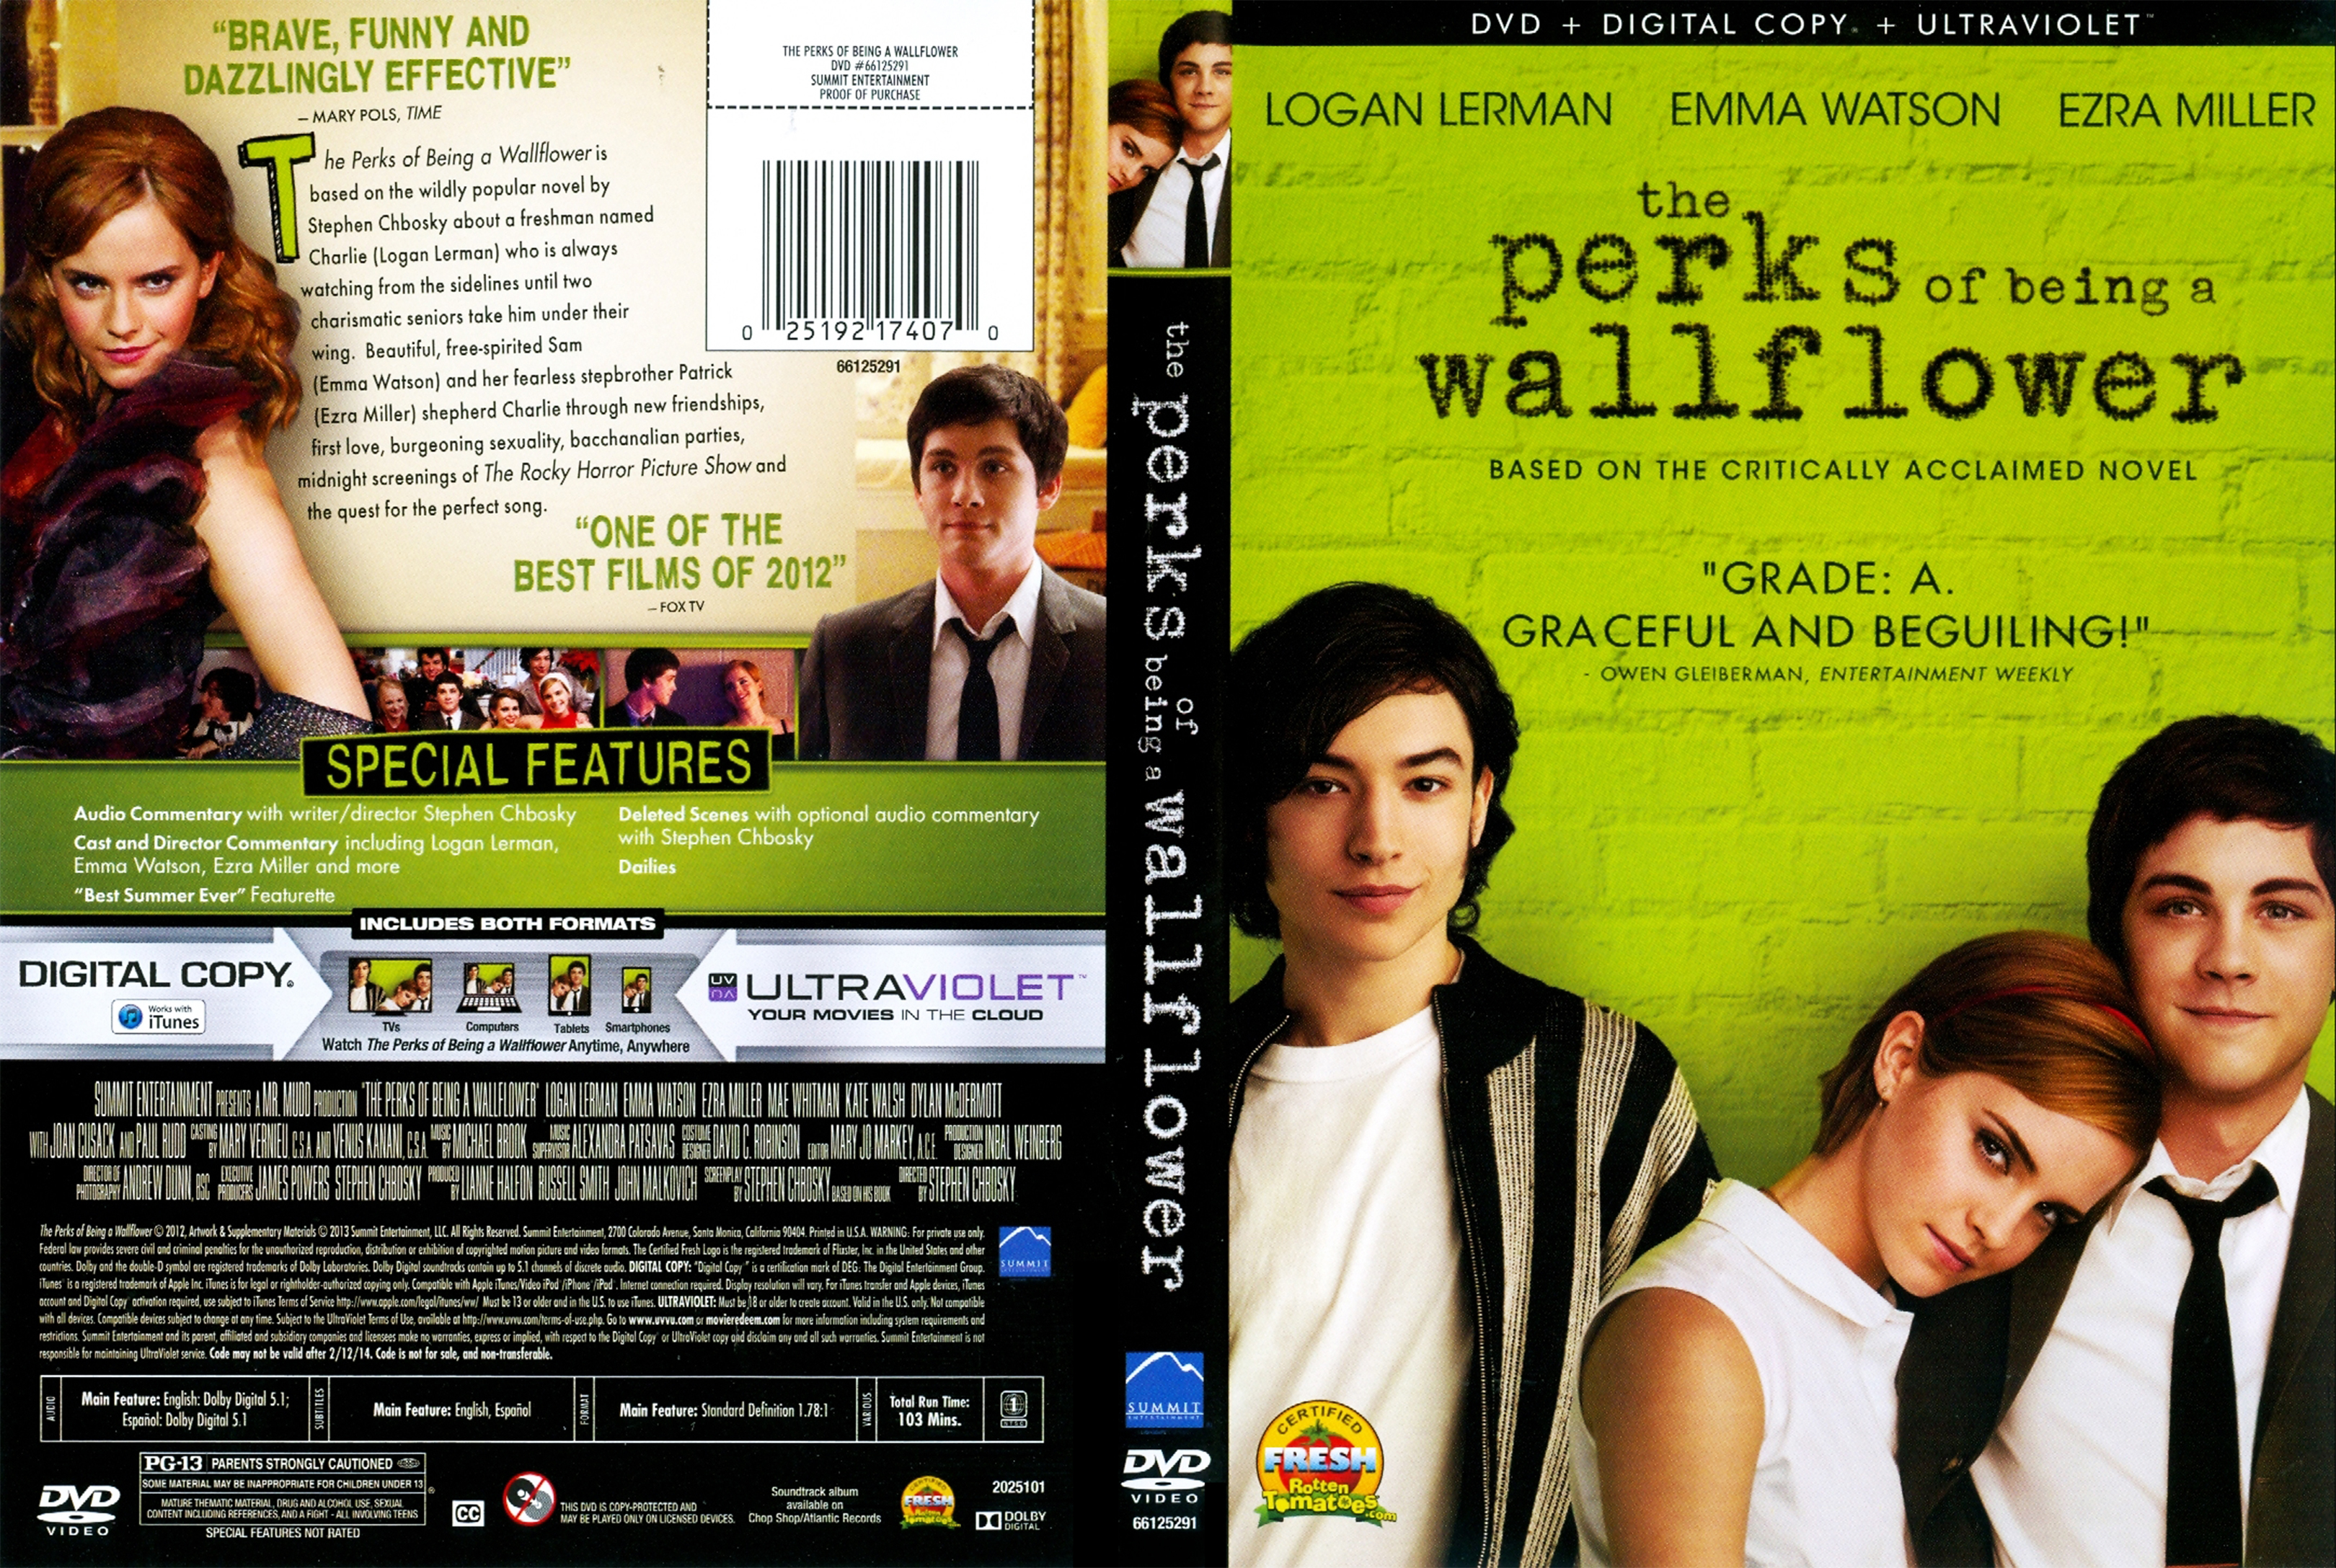 Jaquette DVD The Perks Of Being A Wallflower - Le monde de Charlie Zone 1